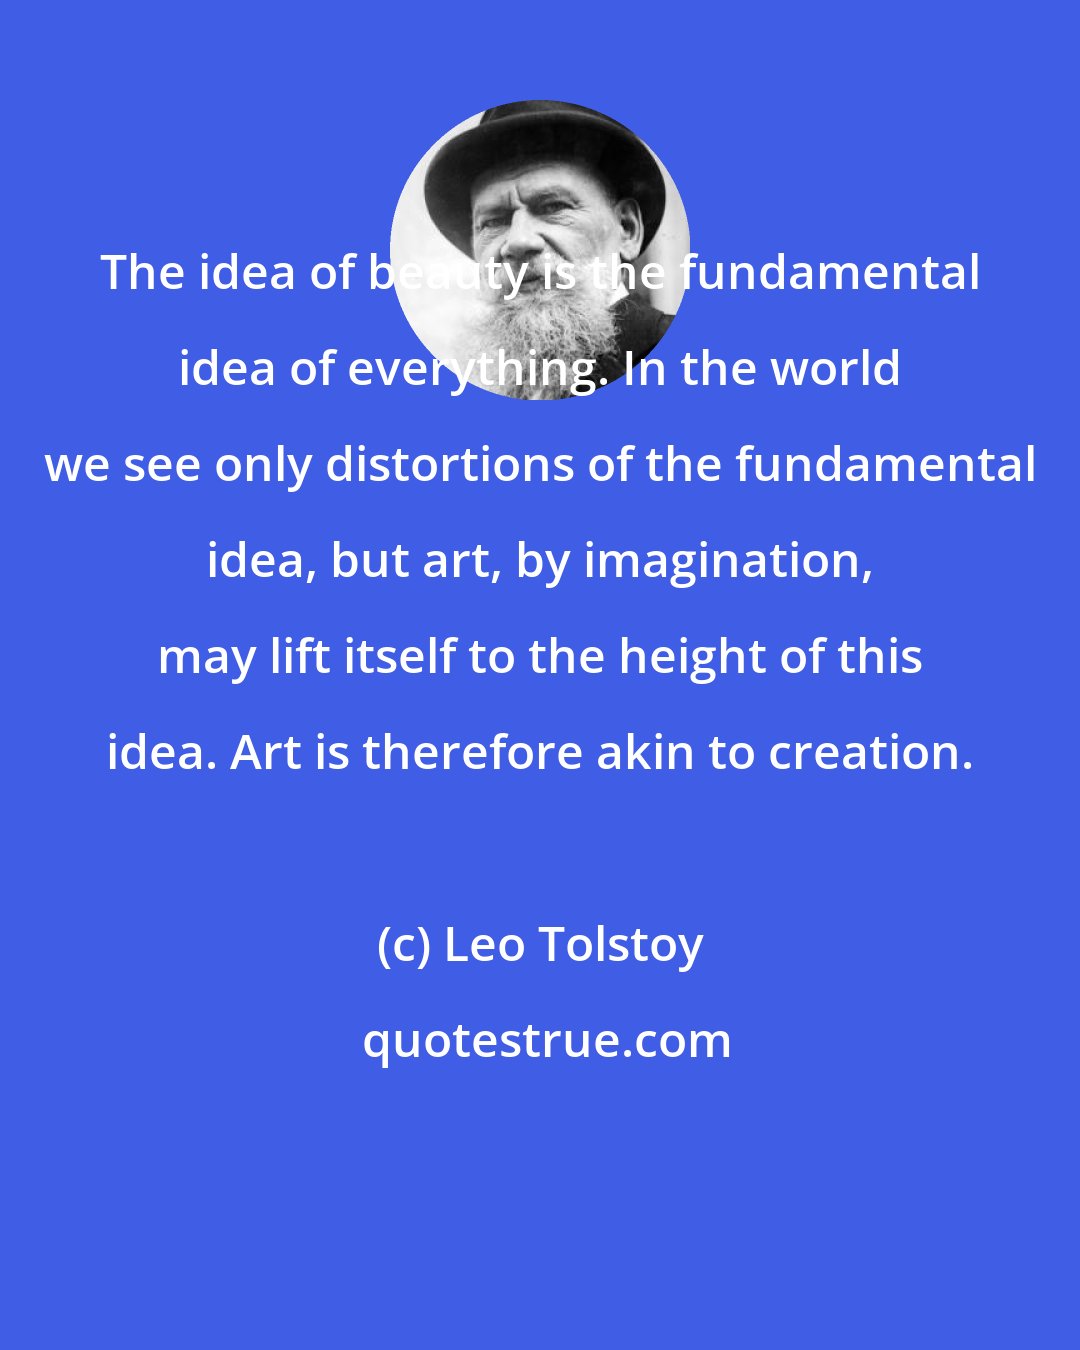 Leo Tolstoy: The idea of beauty is the fundamental idea of everything. In the world we see only distortions of the fundamental idea, but art, by imagination, may lift itself to the height of this idea. Art is therefore akin to creation.